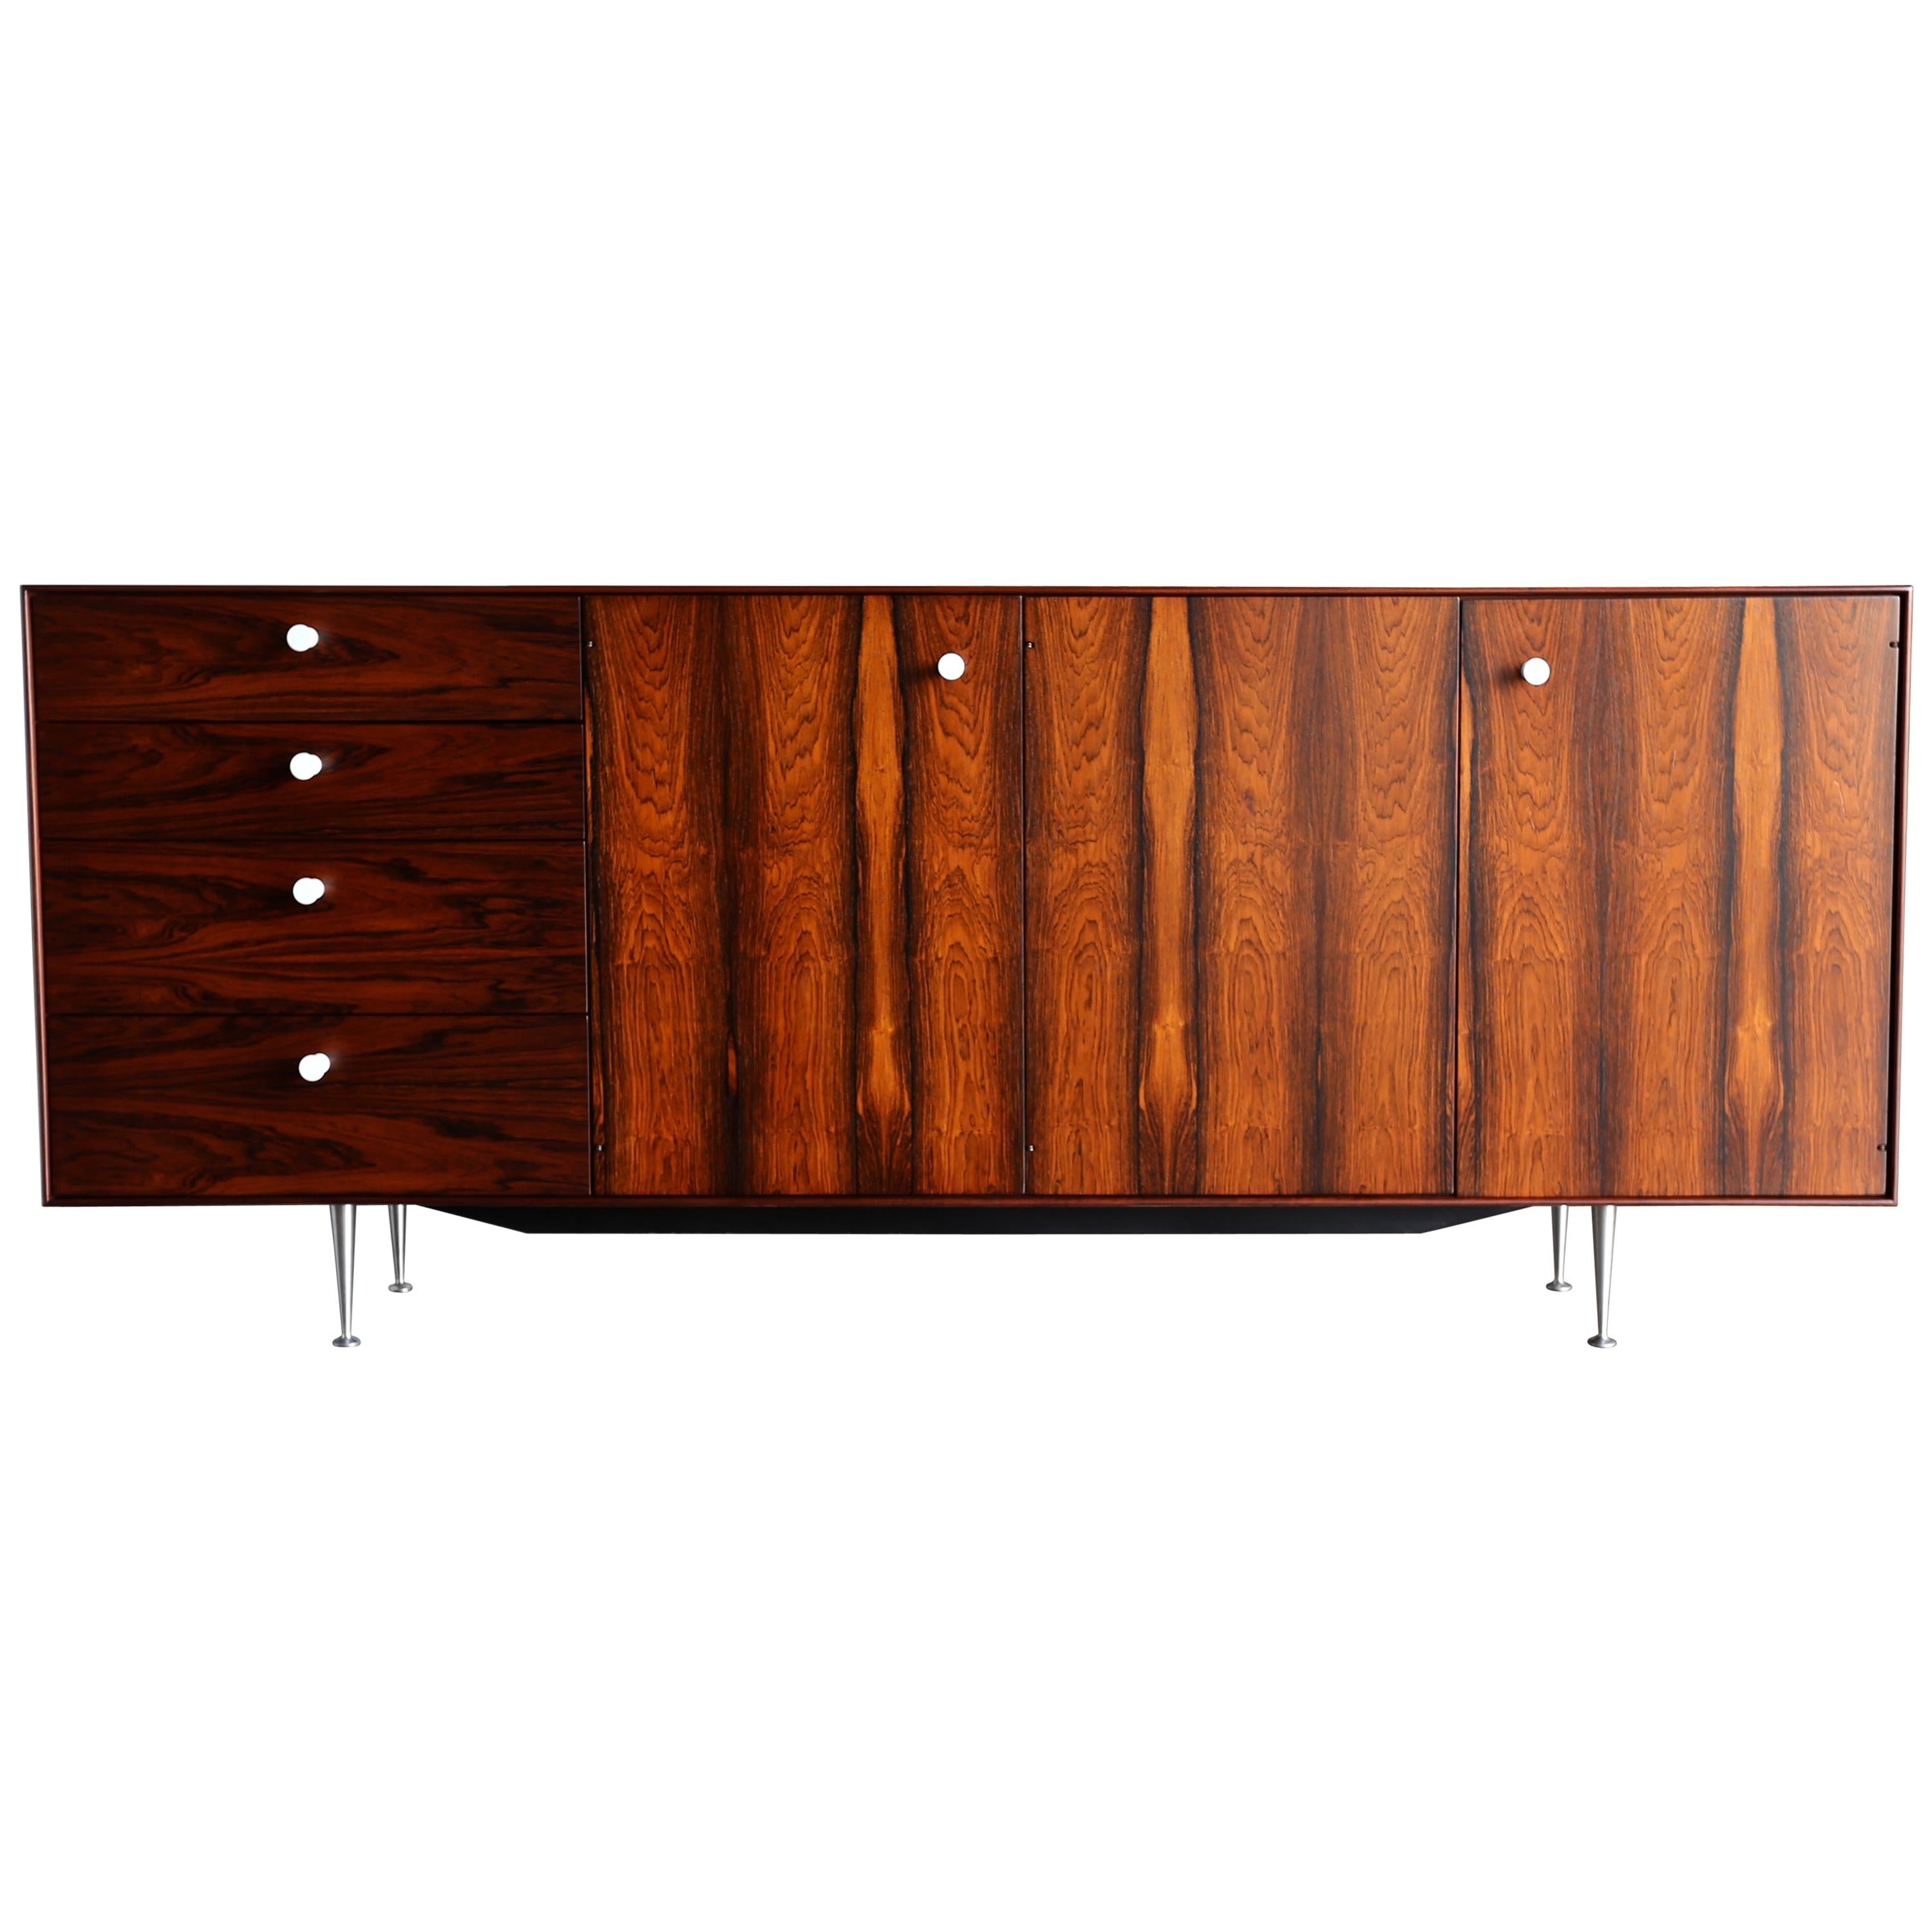 George Nelson Rosewood "Thin Edge" Credenza for Herman Miller, circa 1960